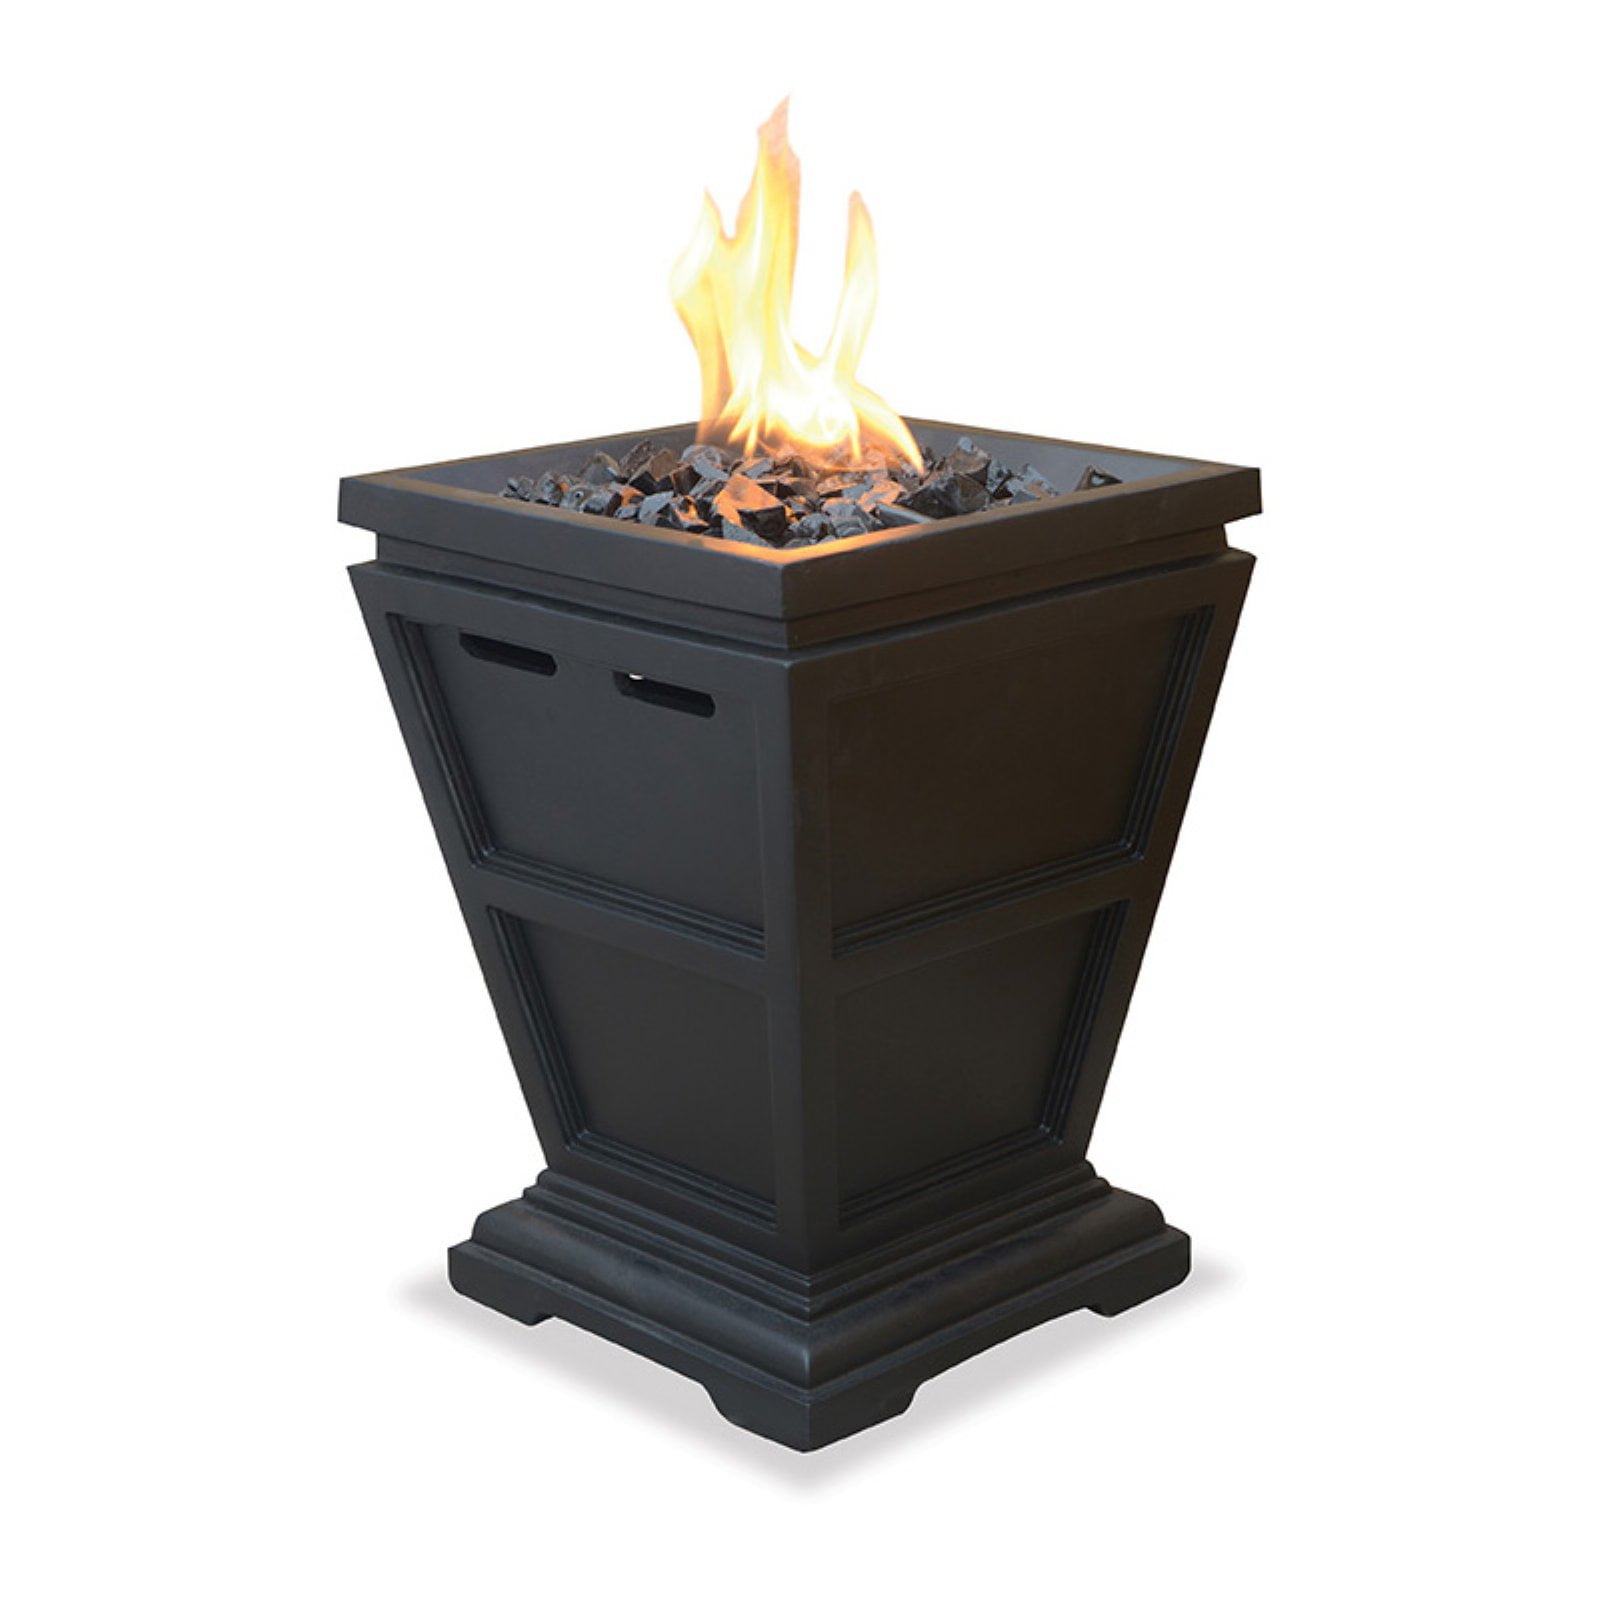 Uniflame Lp Gas Fire Pit Tabletop, Gas Fire Rings For Fire Pits